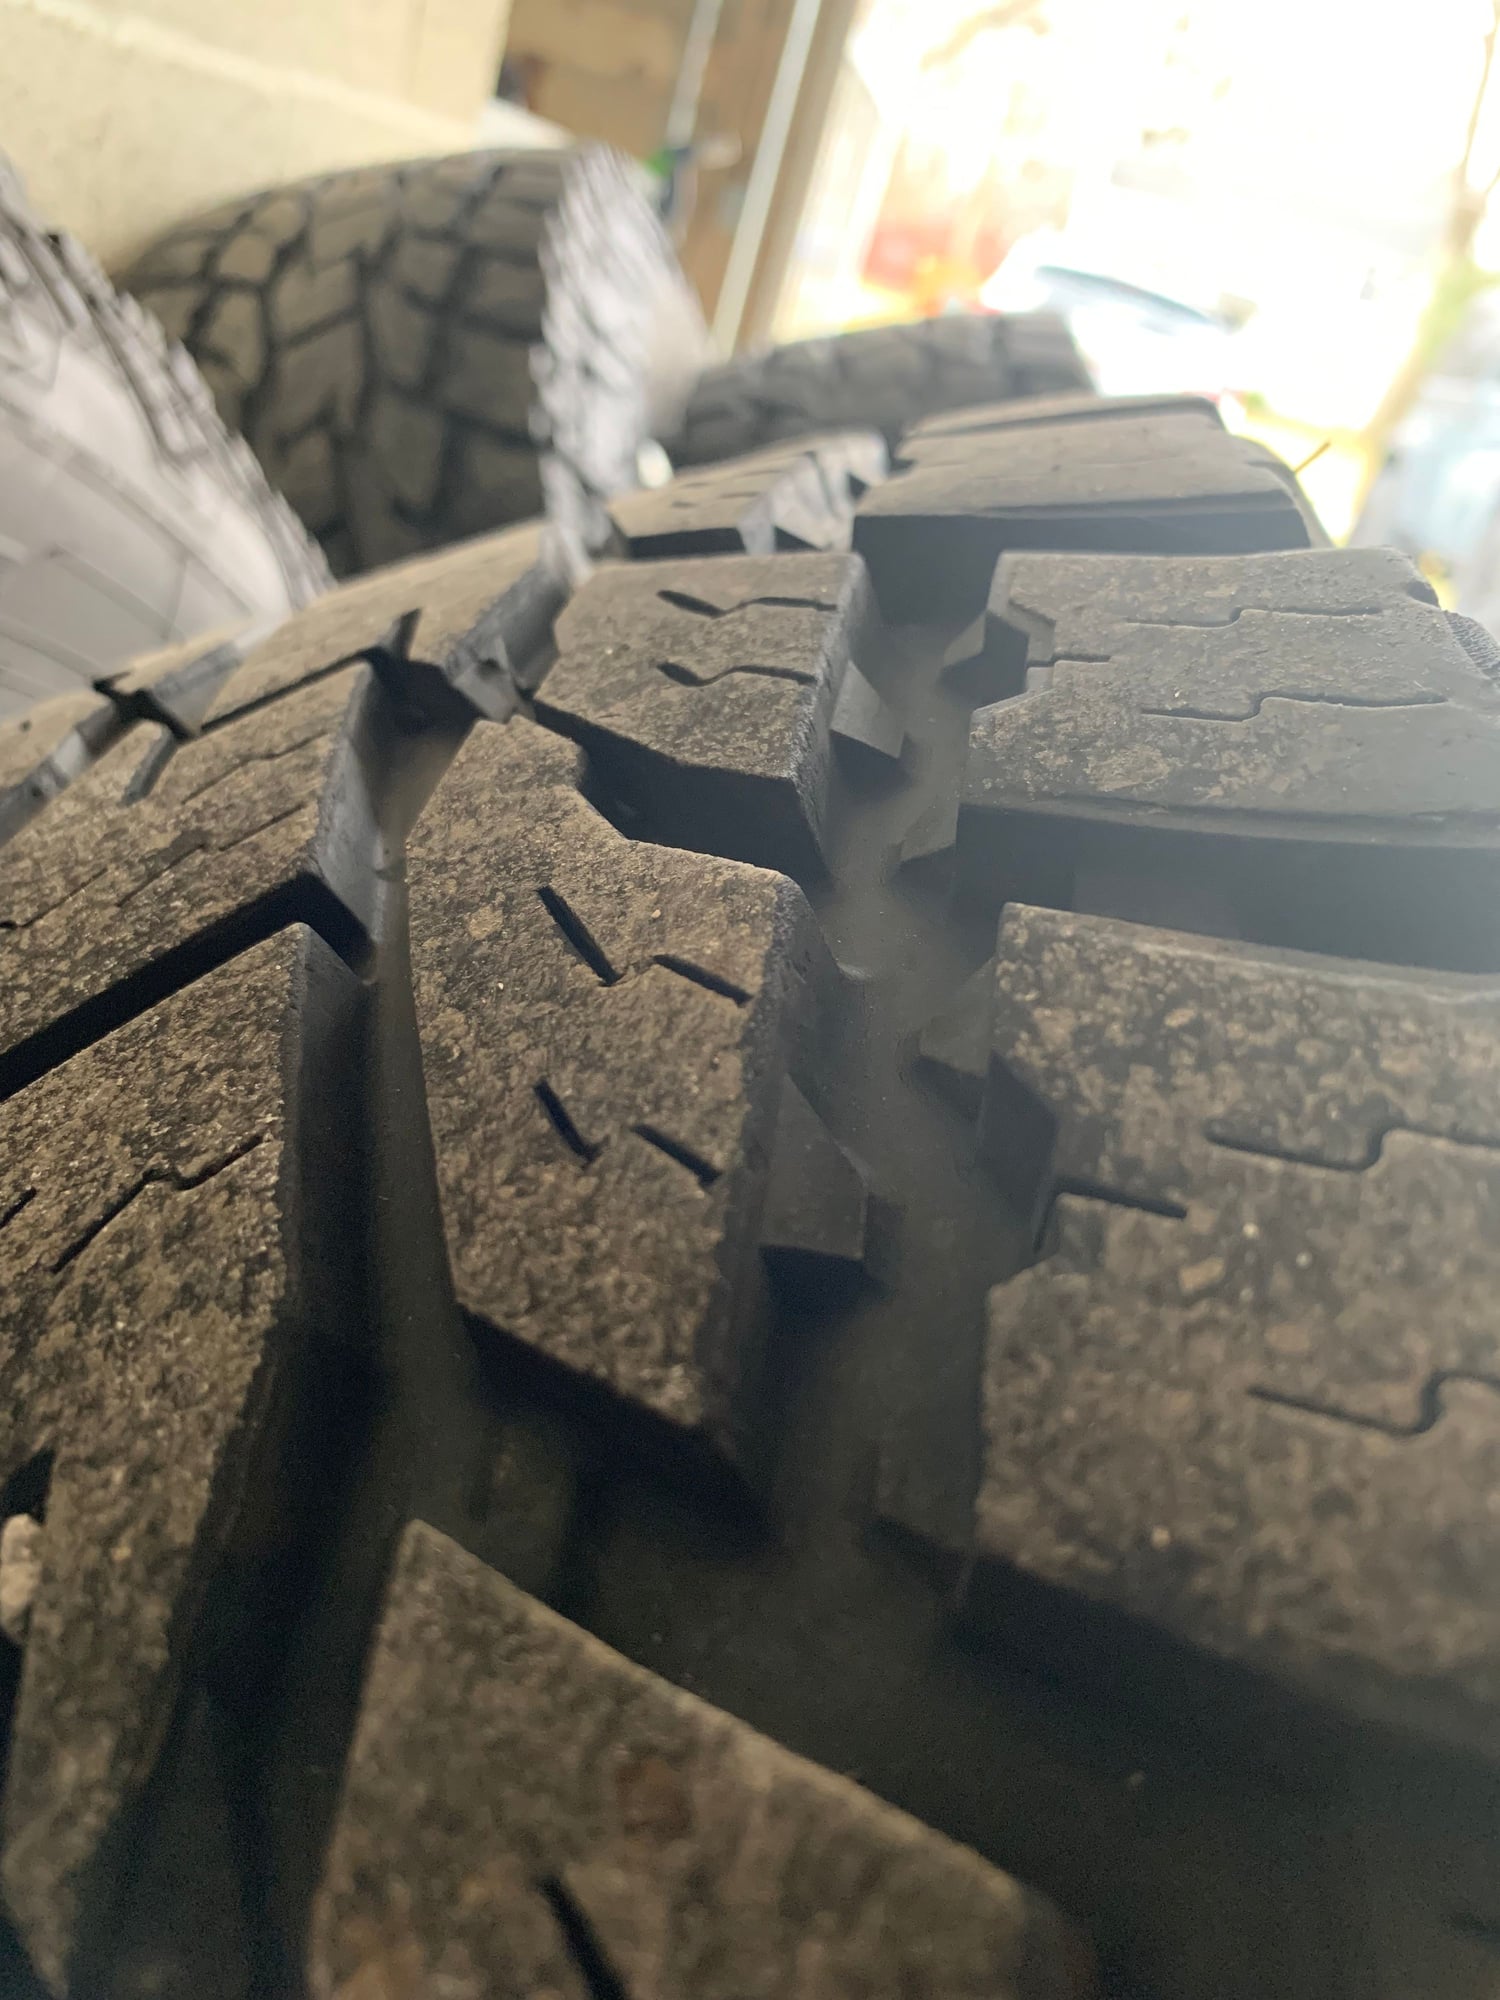 Wheels and Tires/Axles - 5 JK Wheels & Tires (285/75R17) - Used - 2007 to 2018 Jeep Wrangler - Austintown, OH 44515, United States